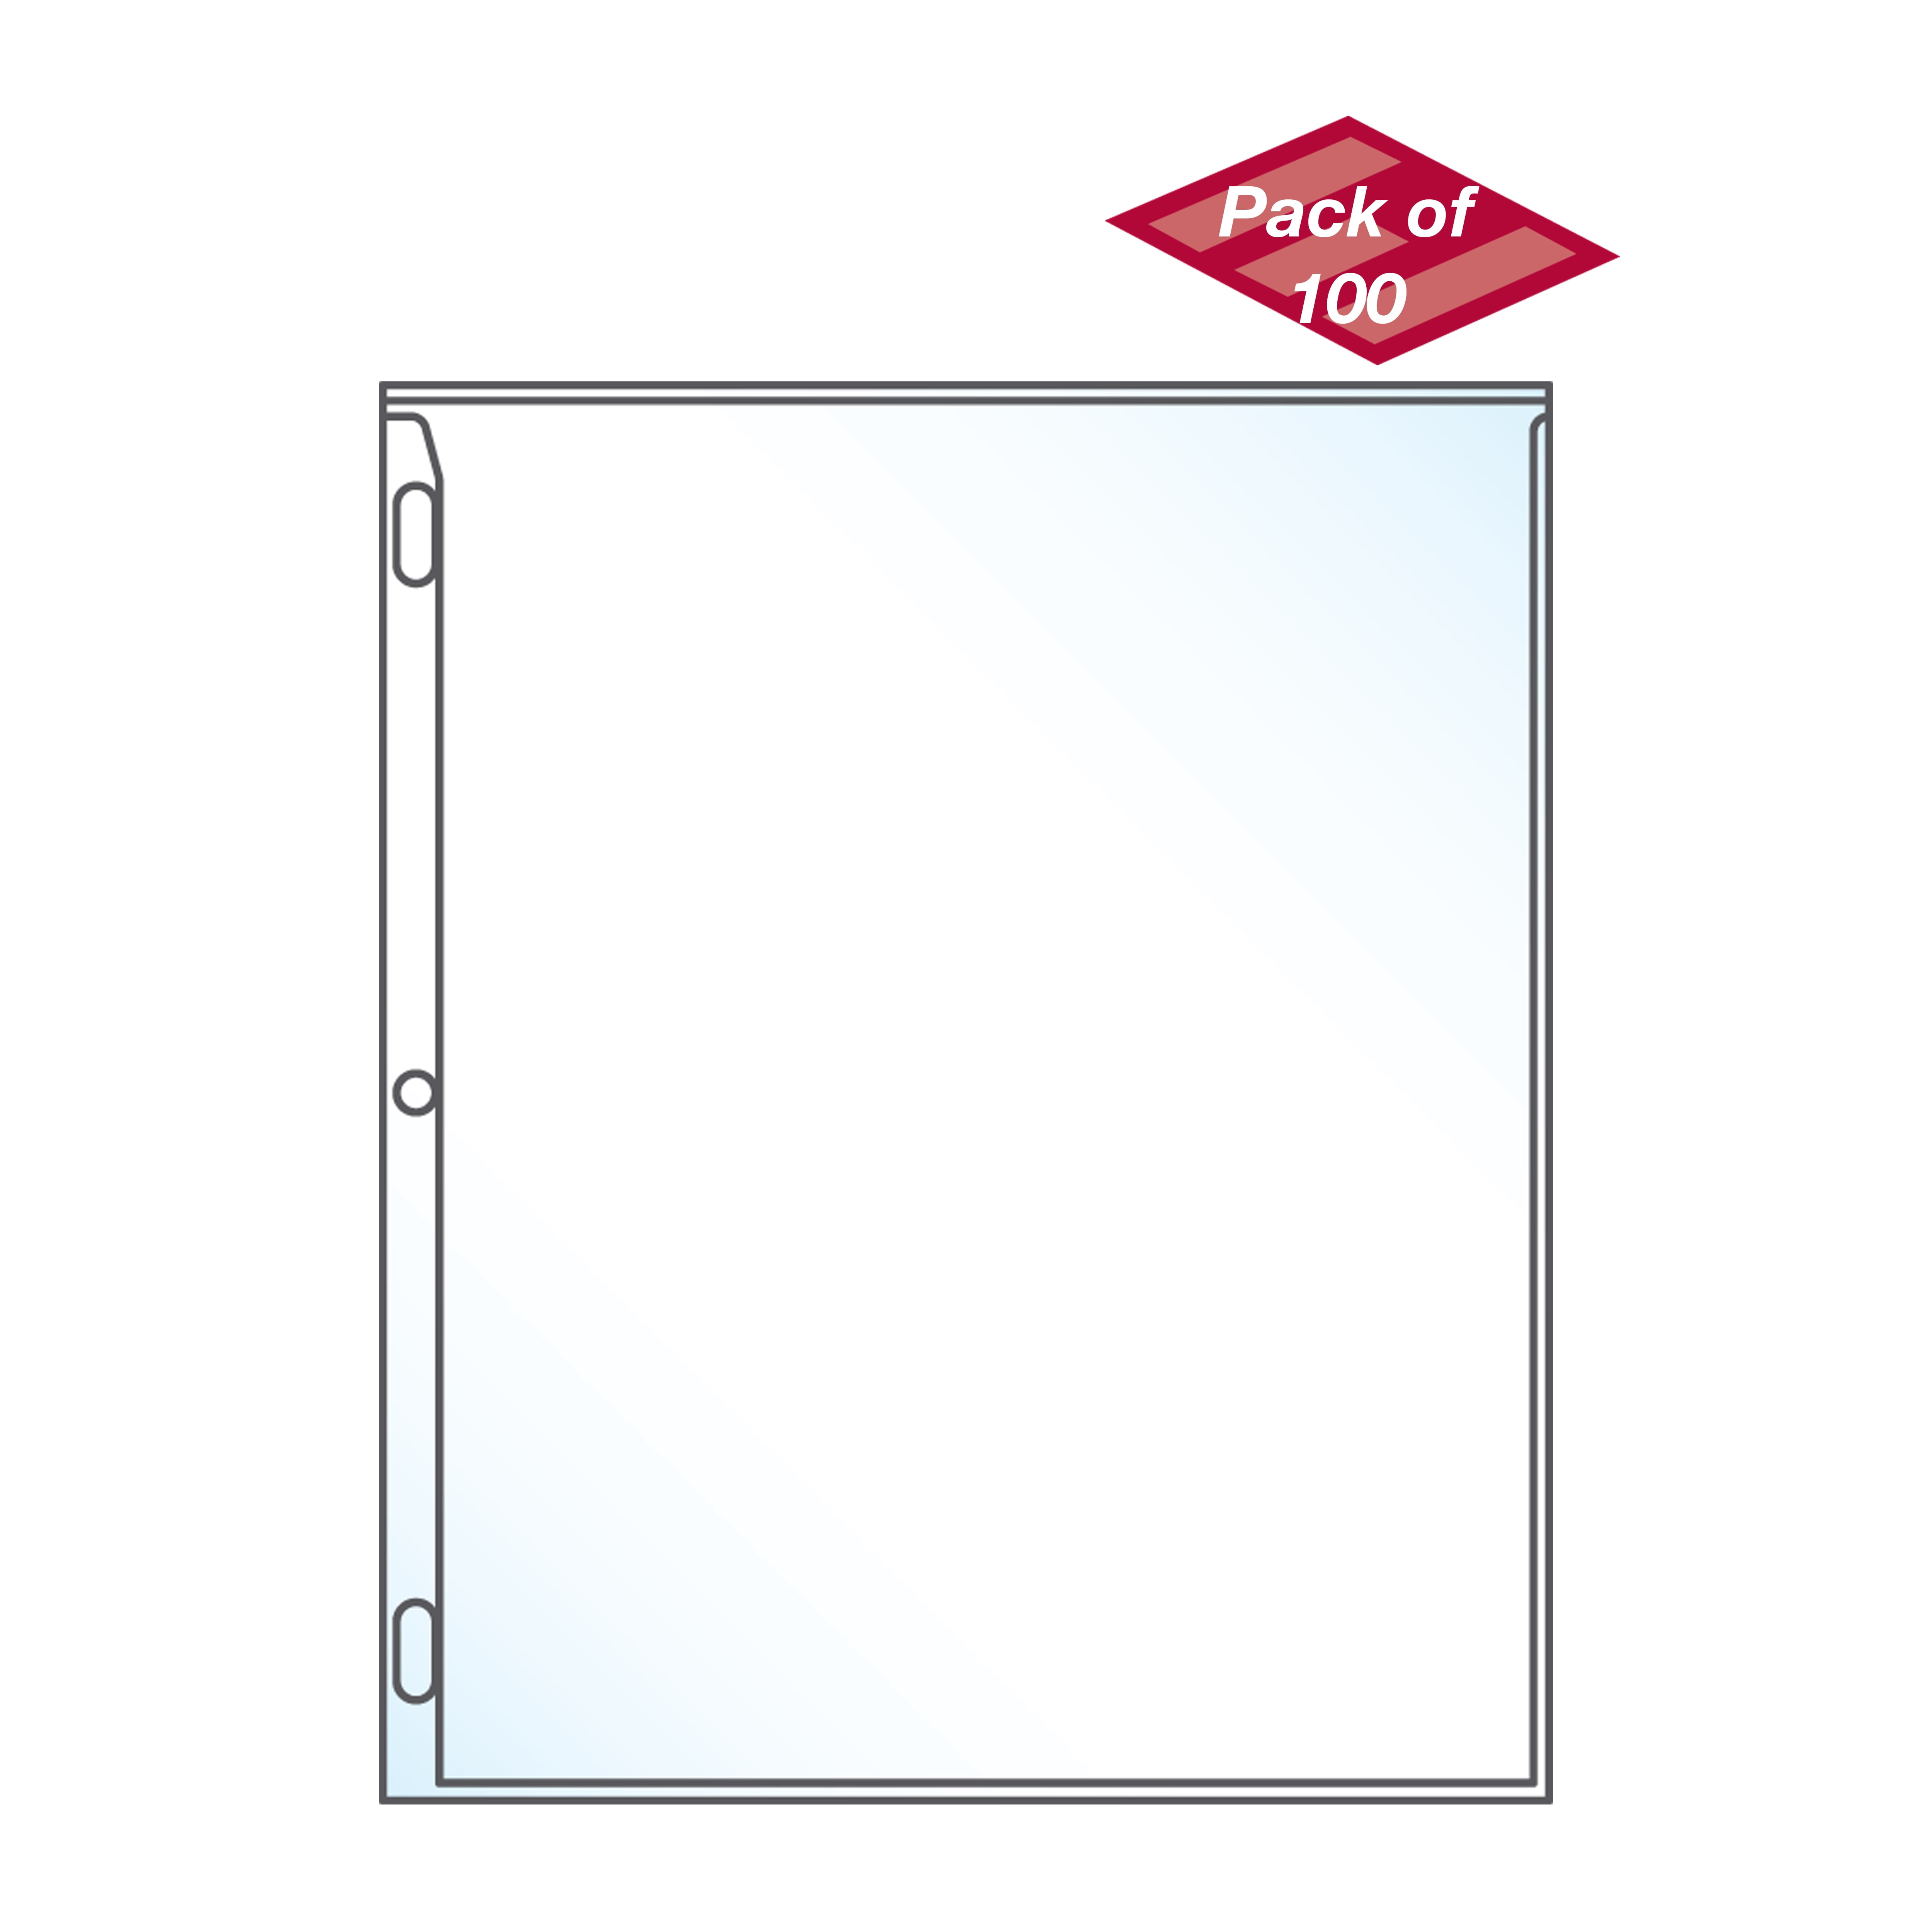 Pl KTRIO Sheet Protectors 8.5 x 11 inch Clear Page Protectors for 3 Ring Binder 